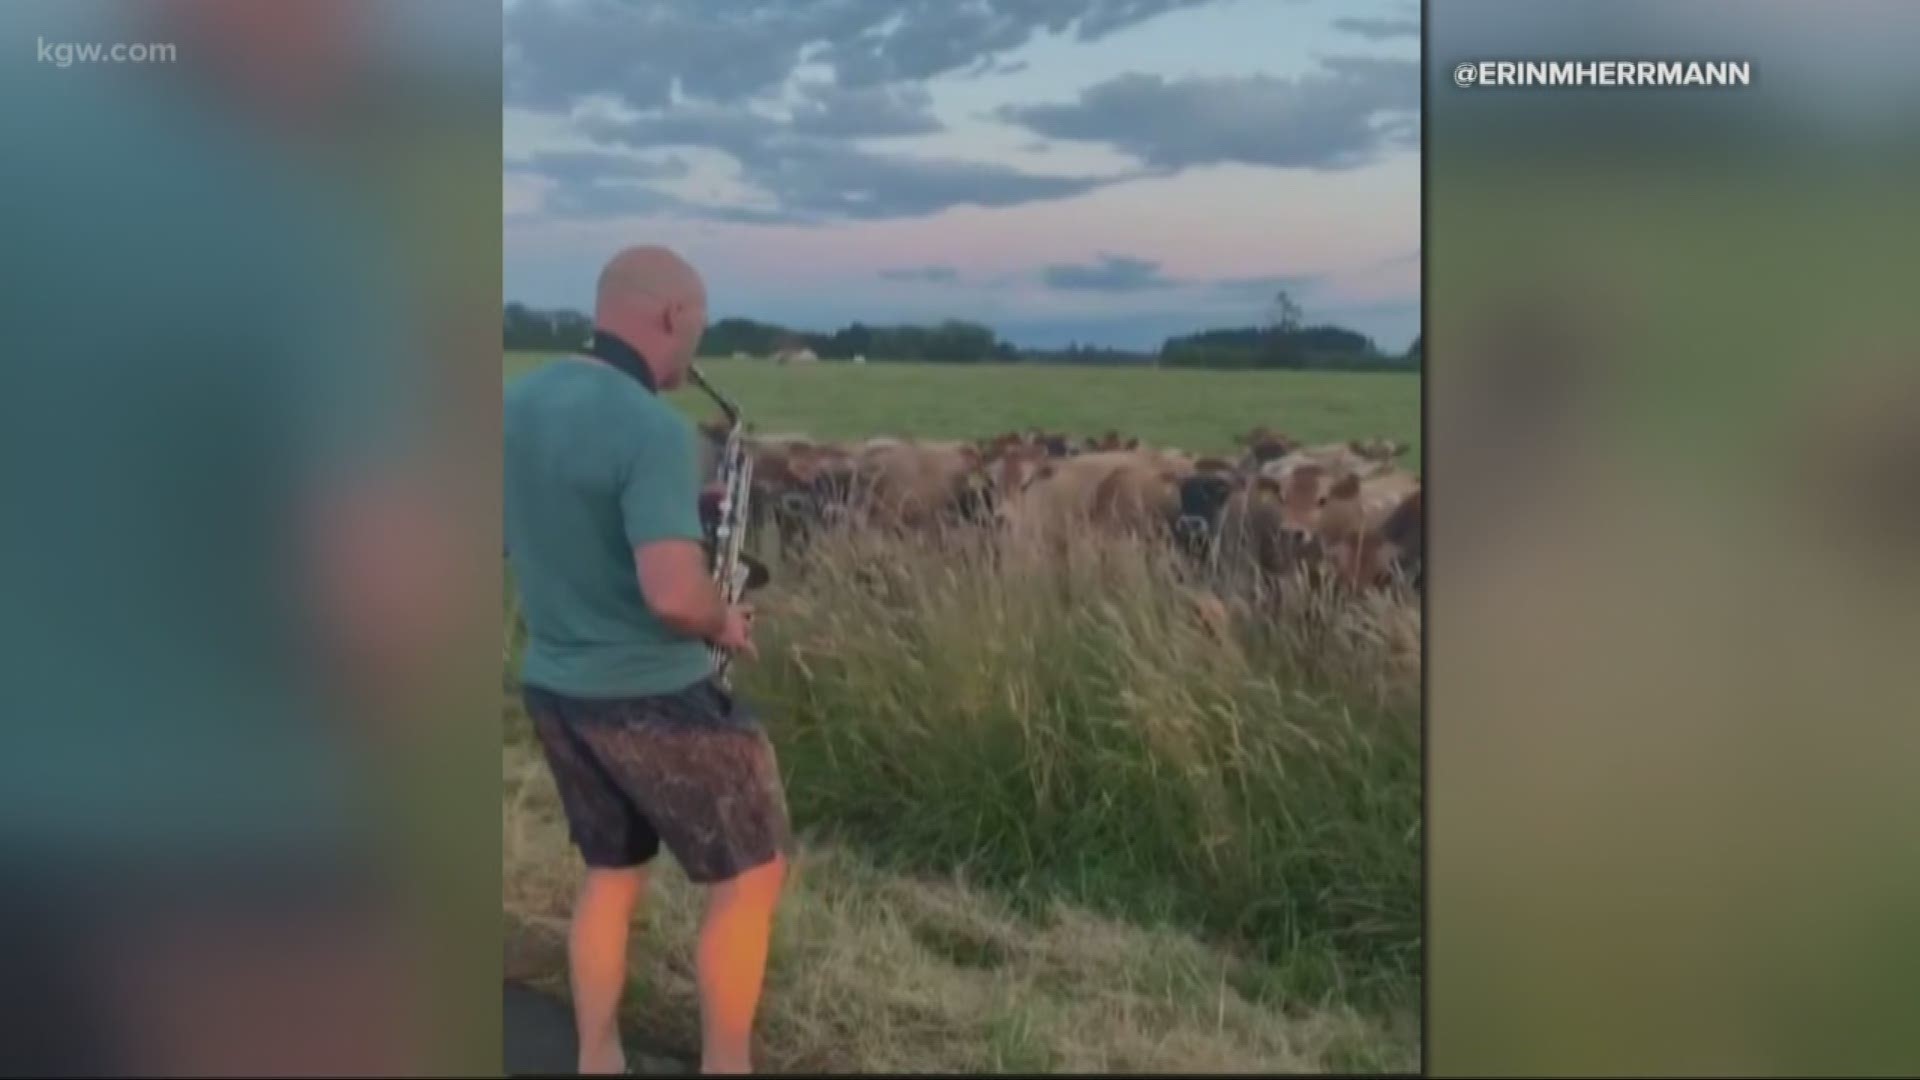 Rick Herrmann of Lafayette, Ore., is learning to play the saxophone and has a forgiving audience of a herd of cows. Once he starts playing they amble over to him. Wait for it ... tequila! Two posts by his daughter Erin are starting to go viral.